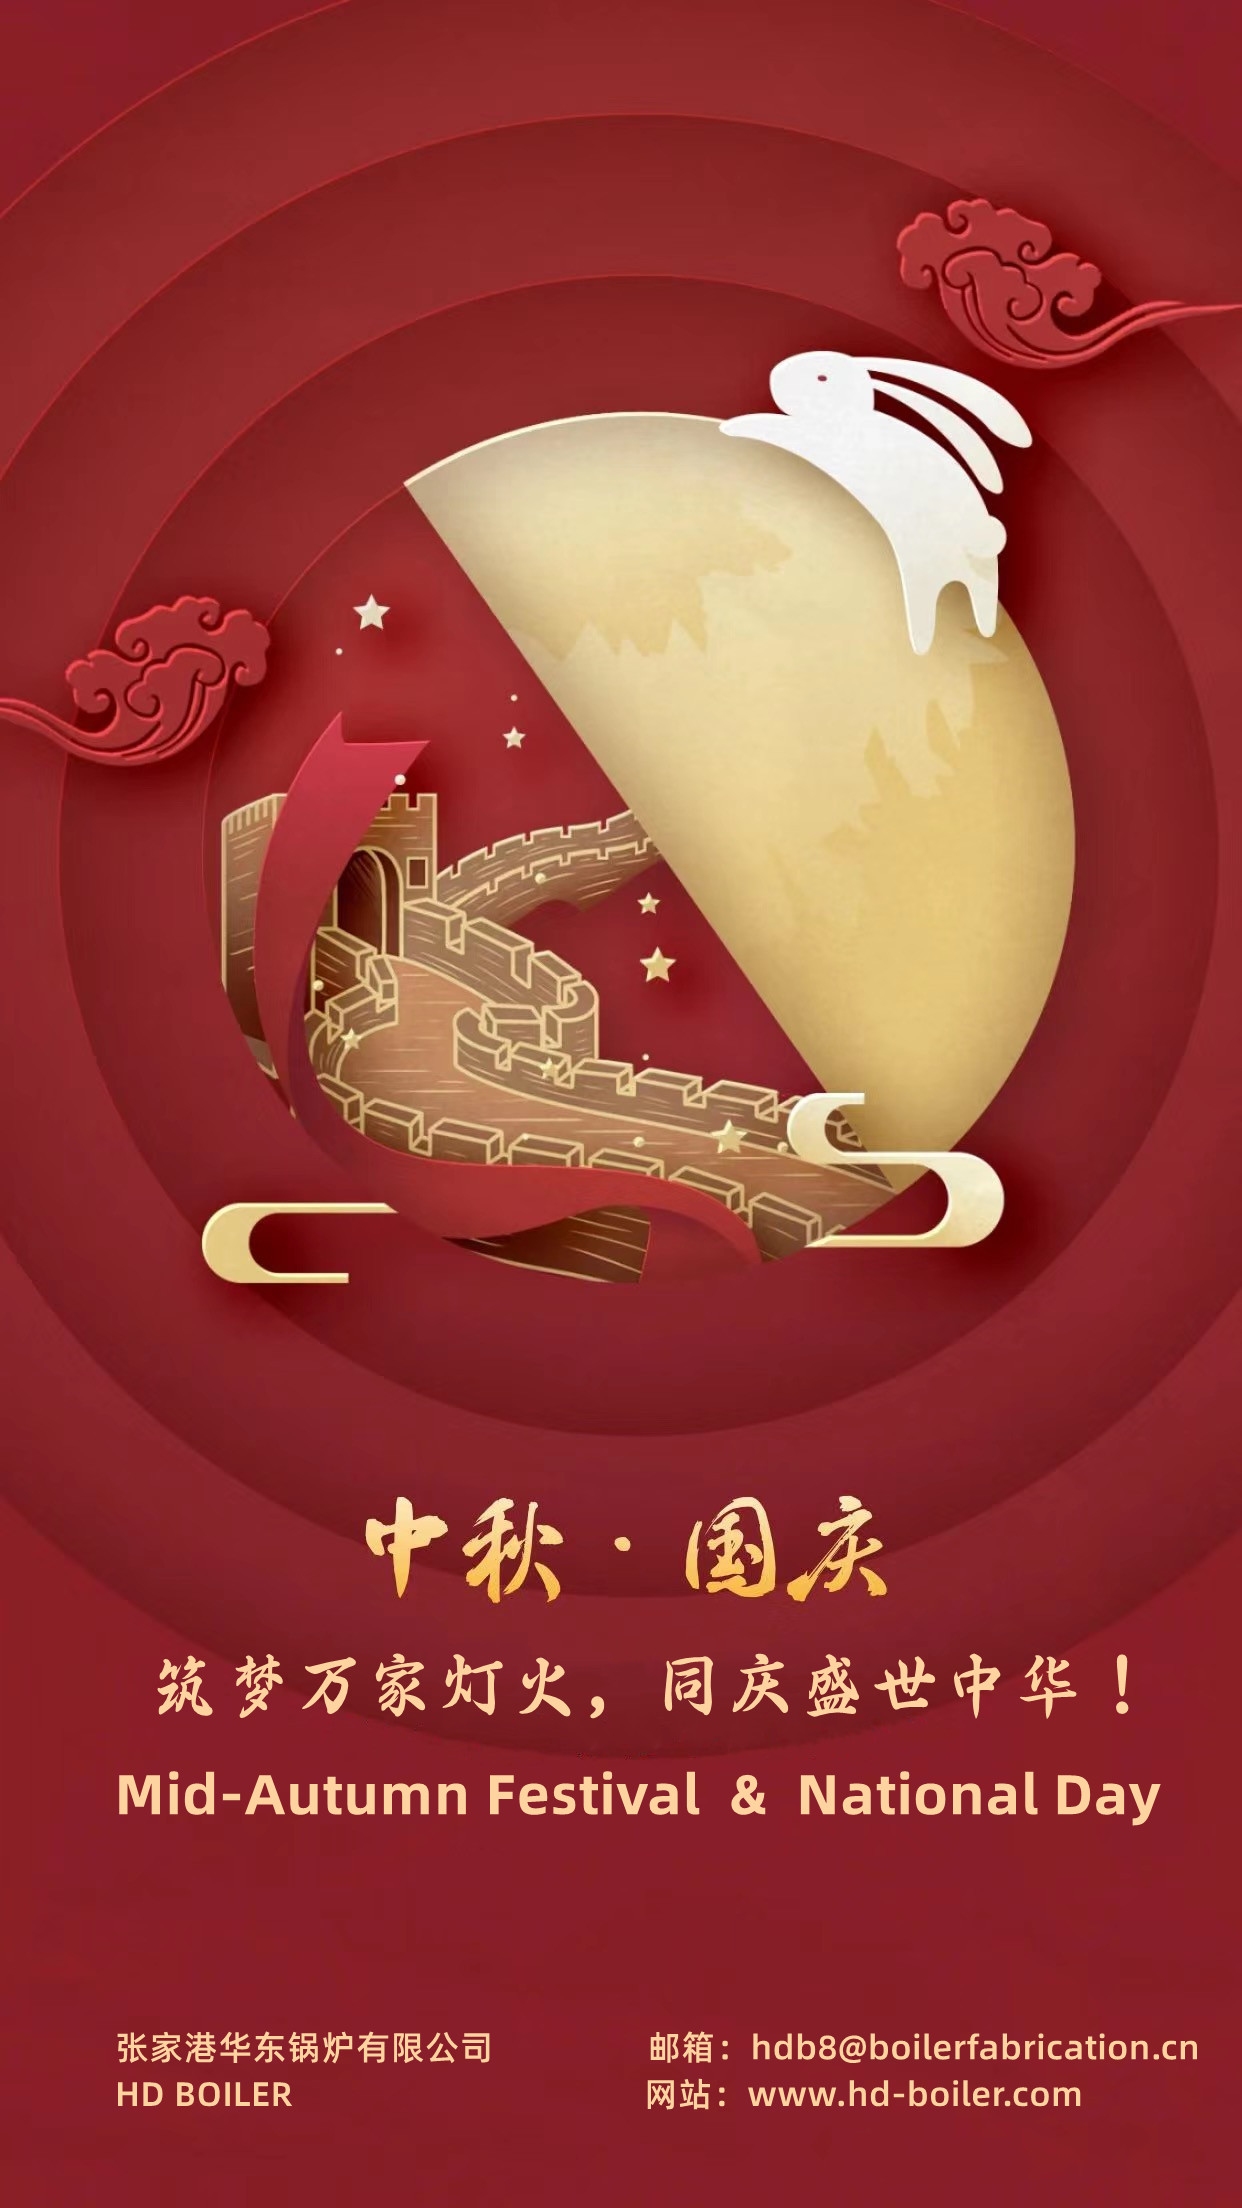 Happy Mid-Autumn Festival & National Day!